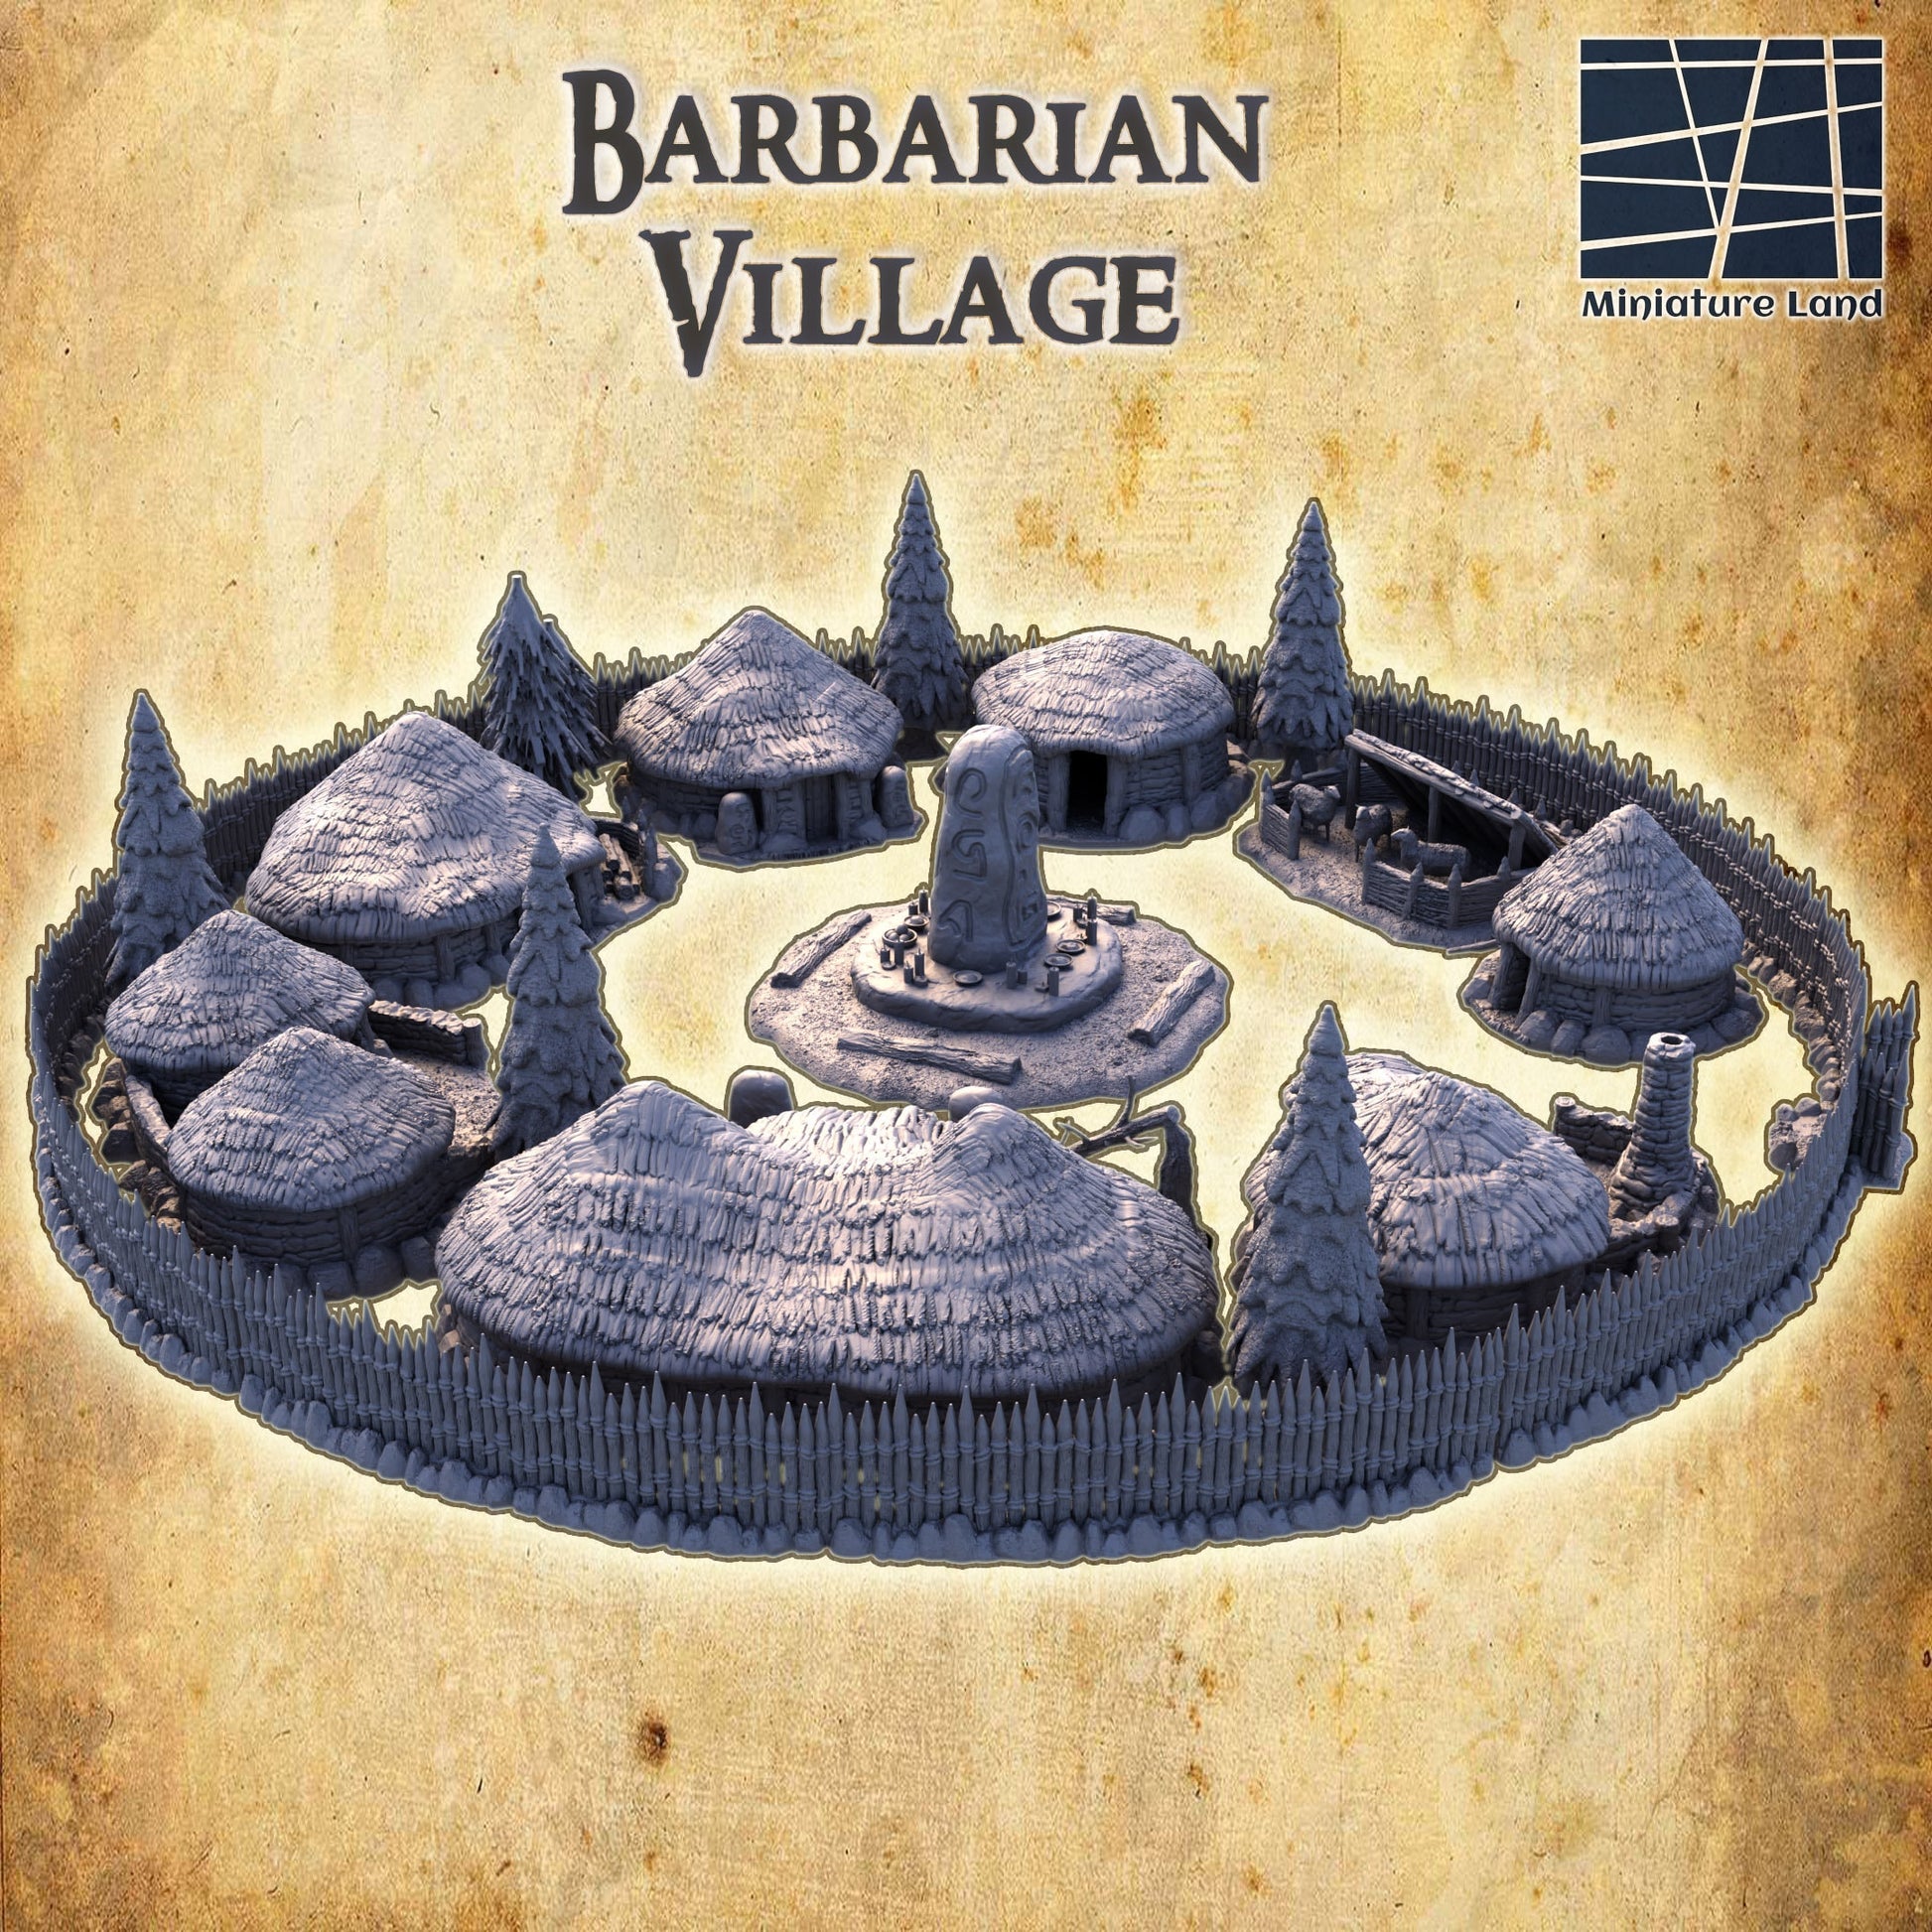 Tabletop Terrain, Mordheim, D&D, Pirate, Tower, Ruin, Ruined, houses, Tabletop, Fantasy Terrain, Town Set, Town and Market, Mordheim Set, Wargaming, Dungeons and Dragons,Barbarian, RPG Set, Village Set, Chaos, small town, Market, town